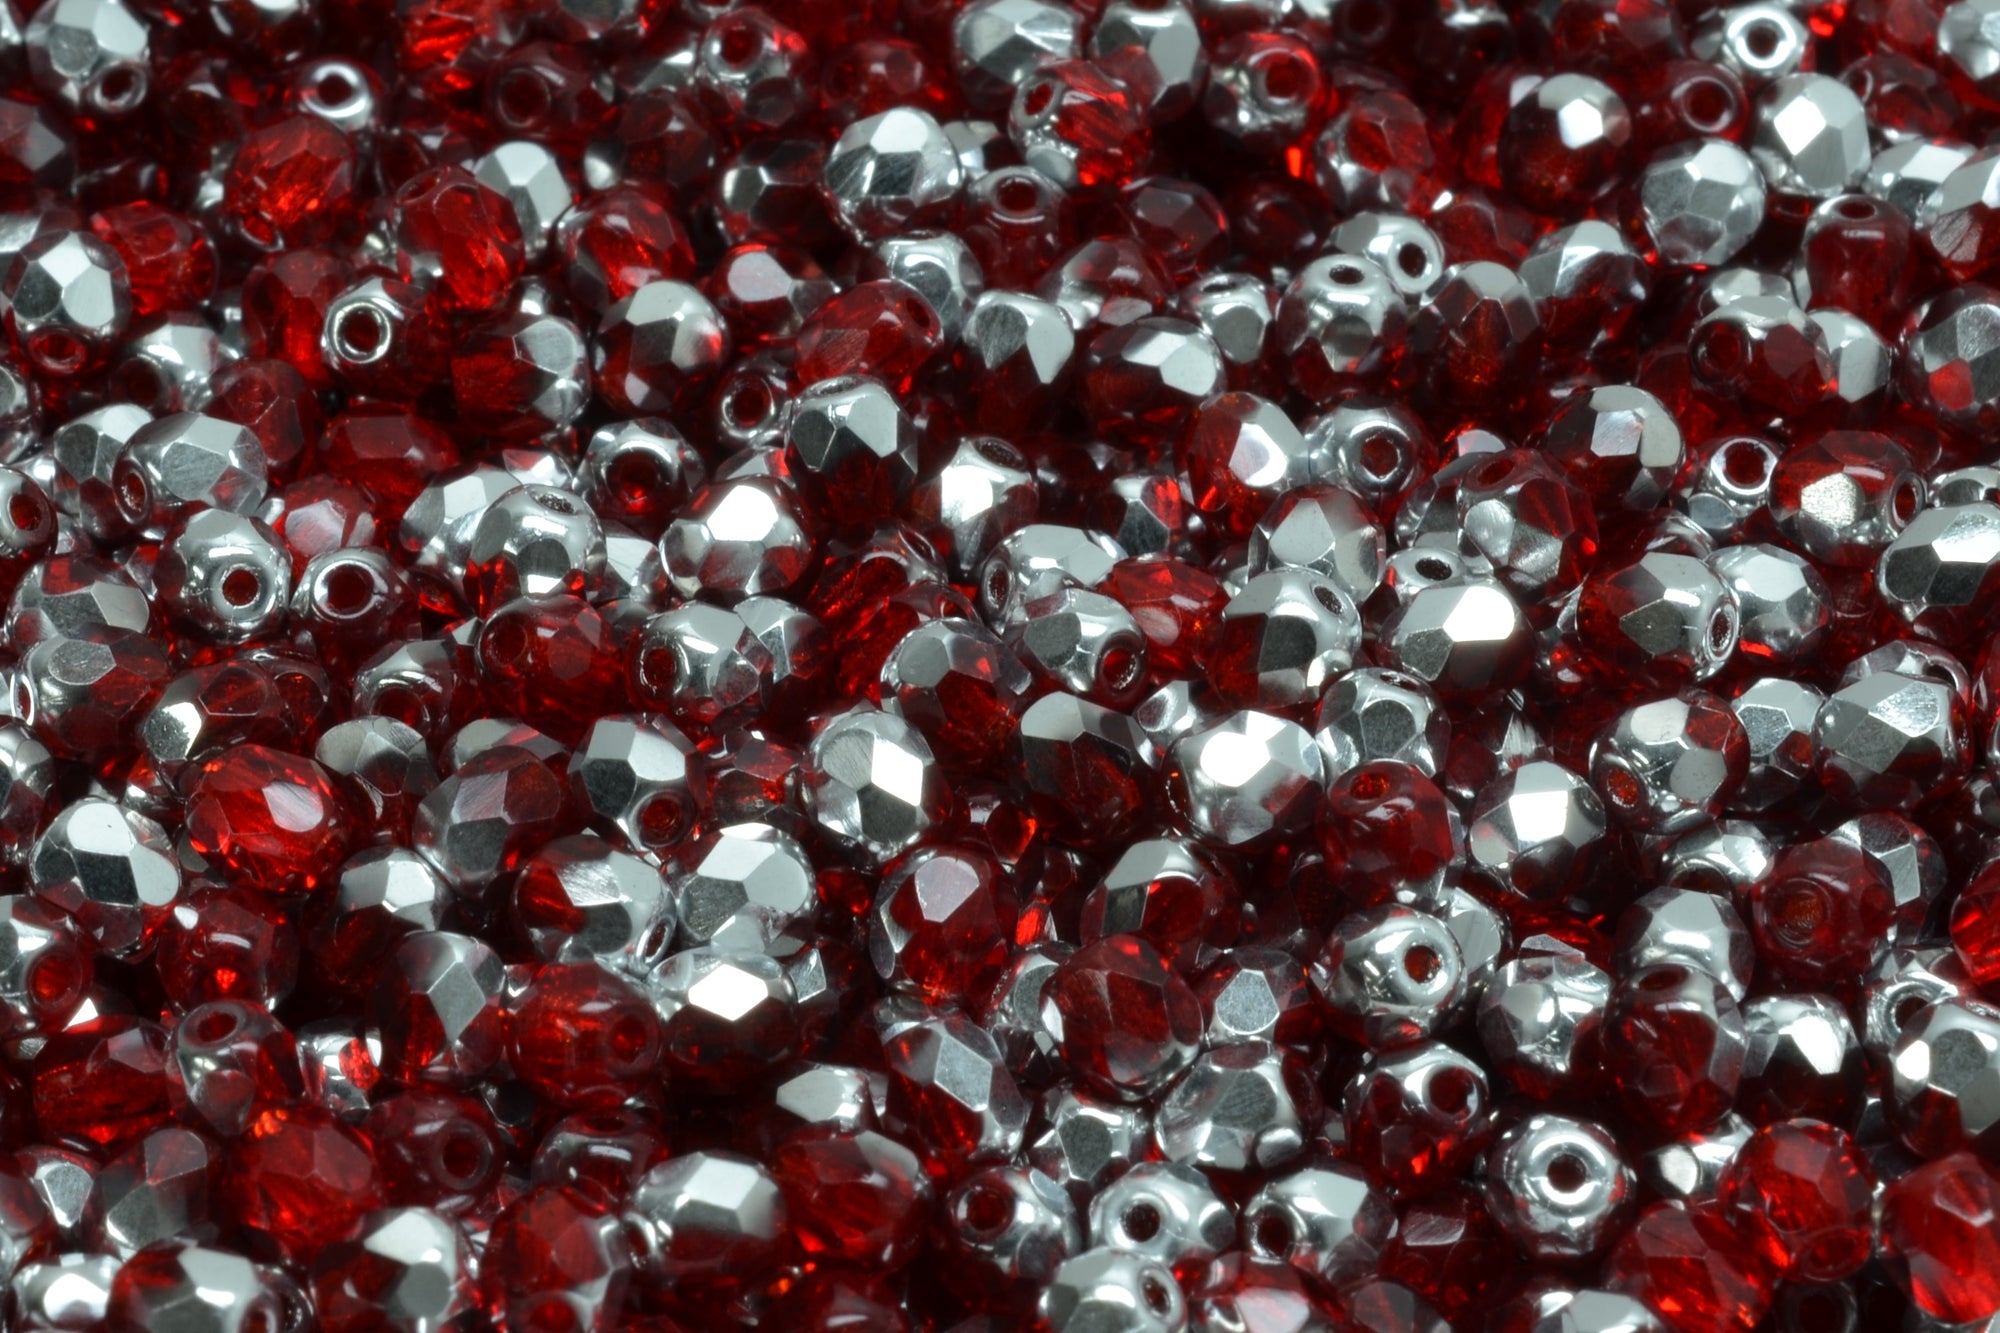 4mm Czech Fire Polish Beads, Siam Ruby Silver, 50 pieces